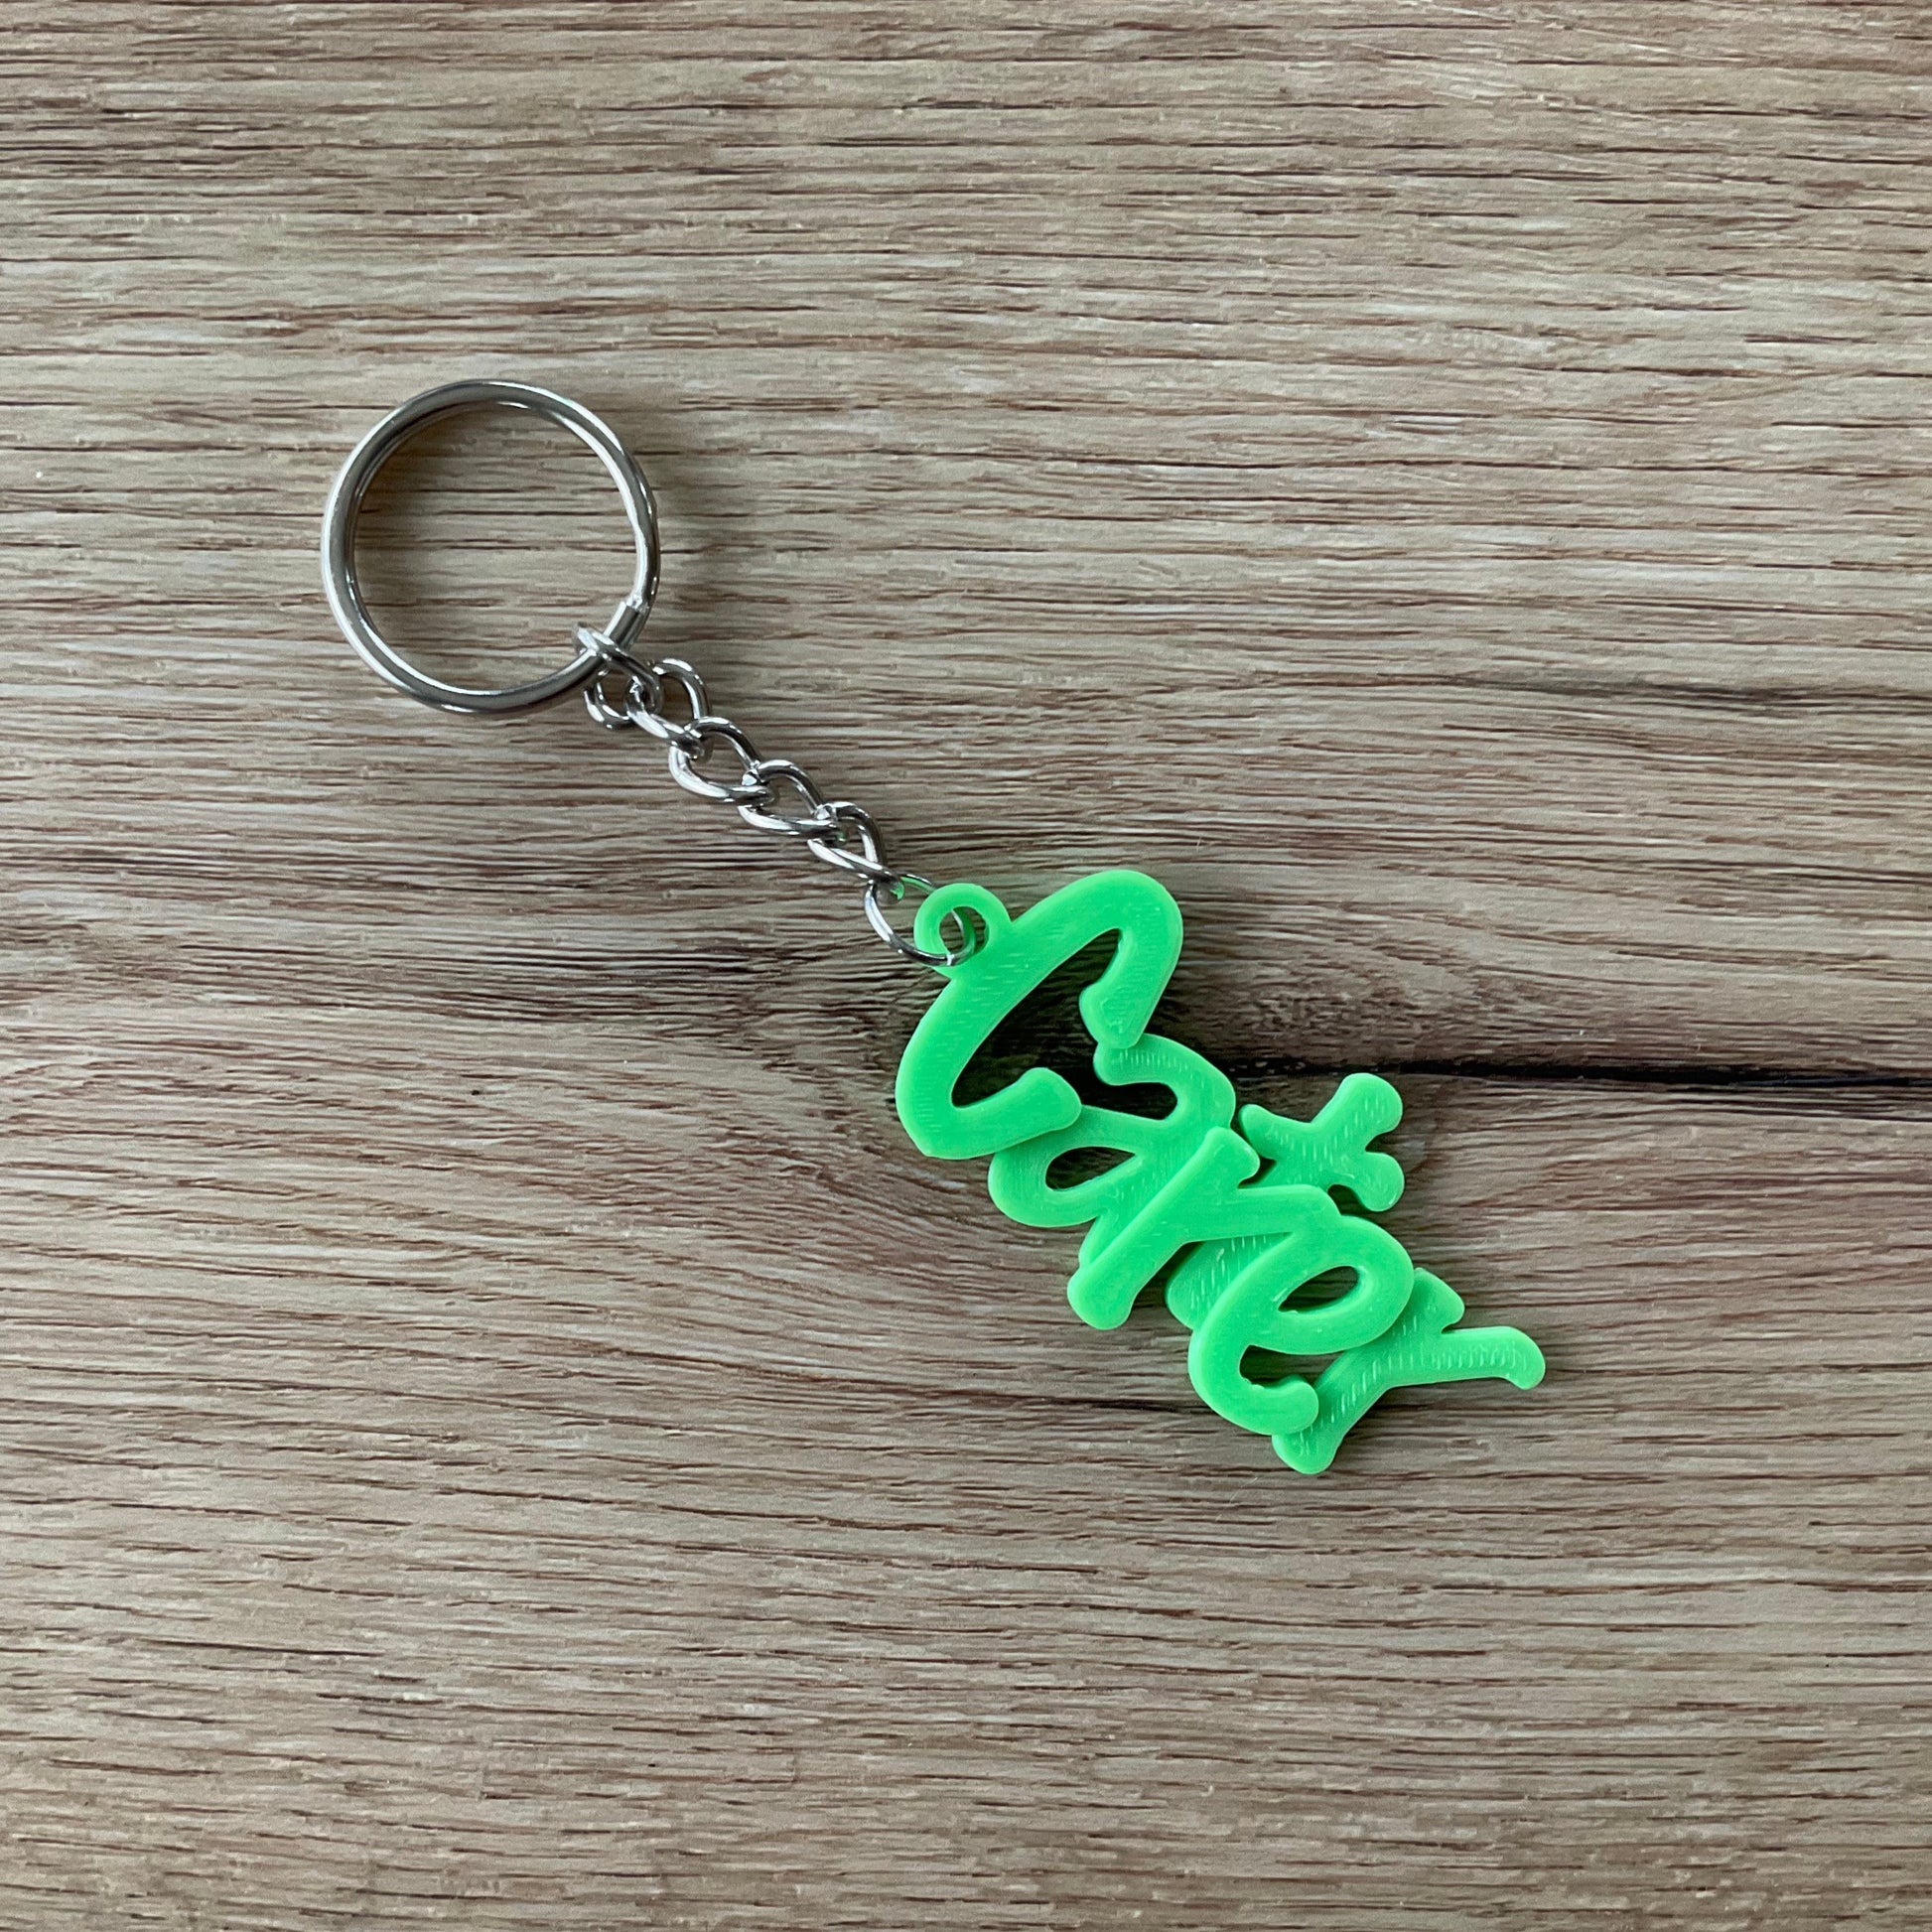 An image of the sample keychain in the colour Green